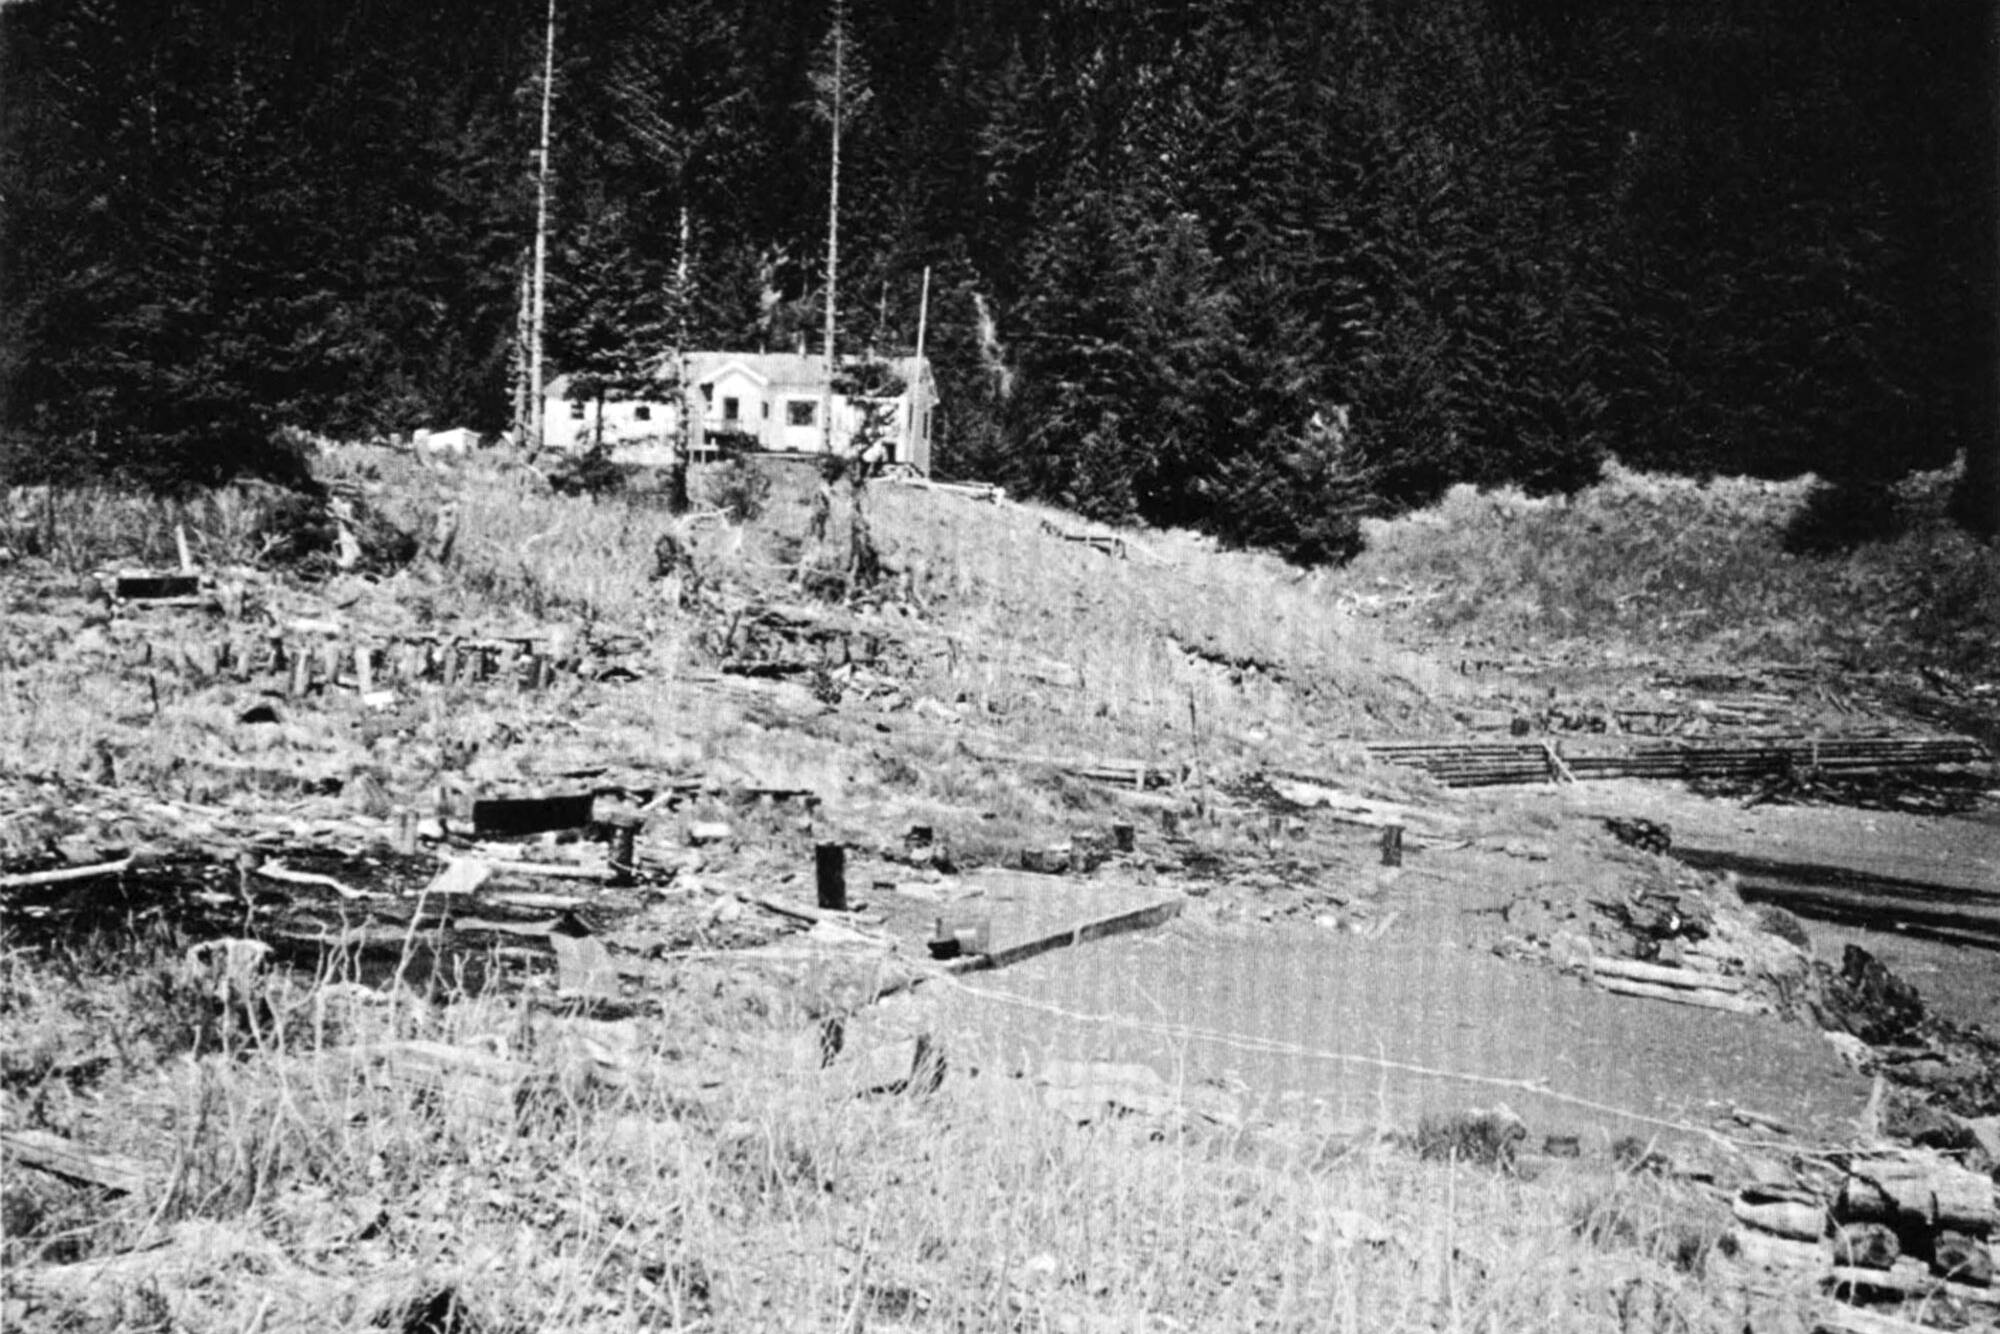 Chenega Bay in 1964 following the great earthquake. A schoolhouse survived the earthquake and tsunami that followed. The tsunami destroyed houses lower than the schoolhouse. (Photo by George Plafker)